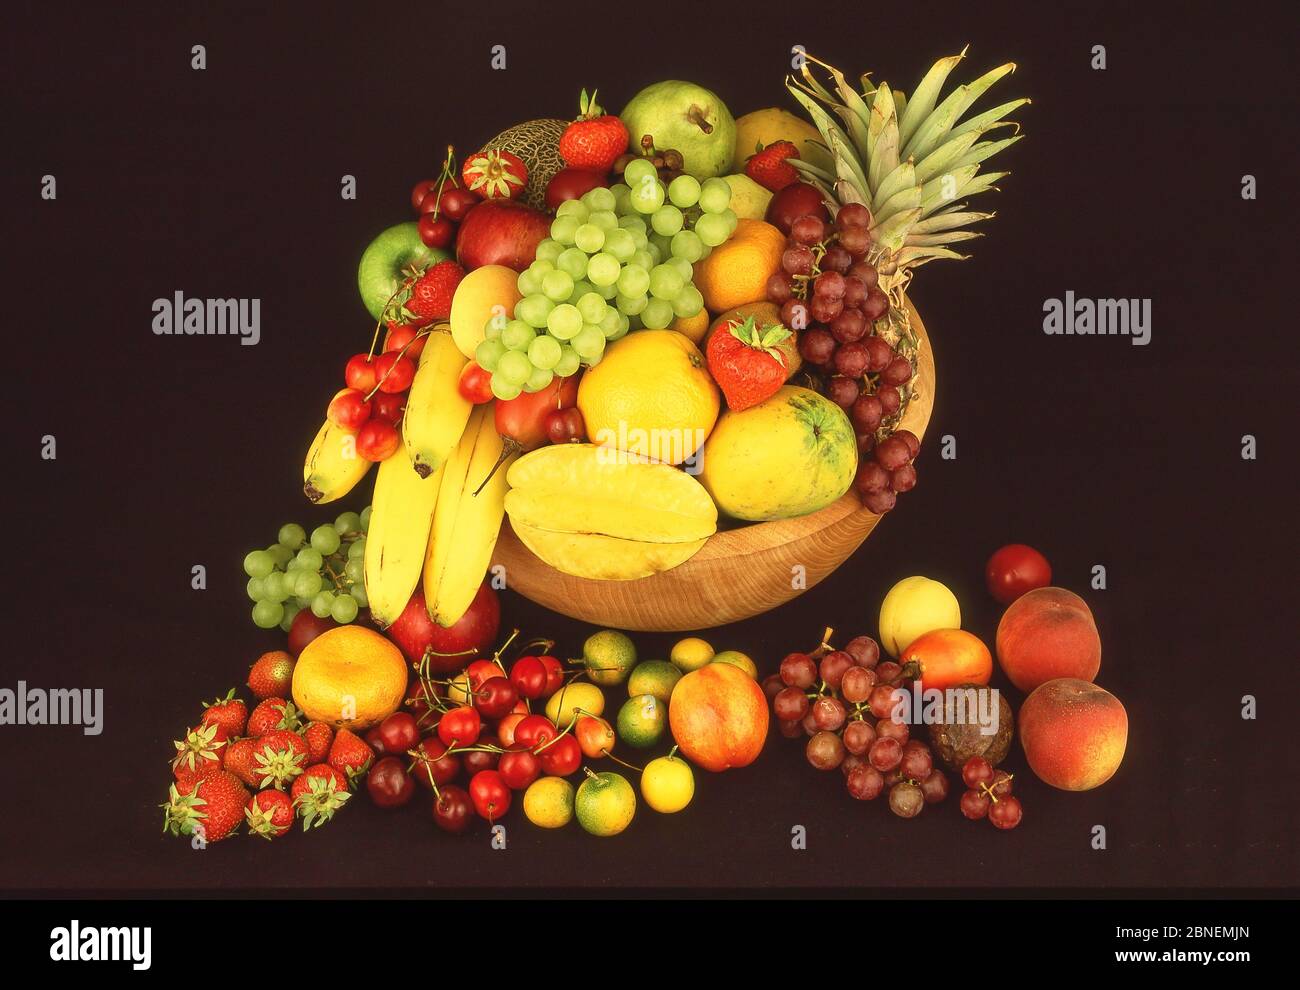 Fruit and tropical fruit selection, Greater London, England, United Kingdom Stock Photo